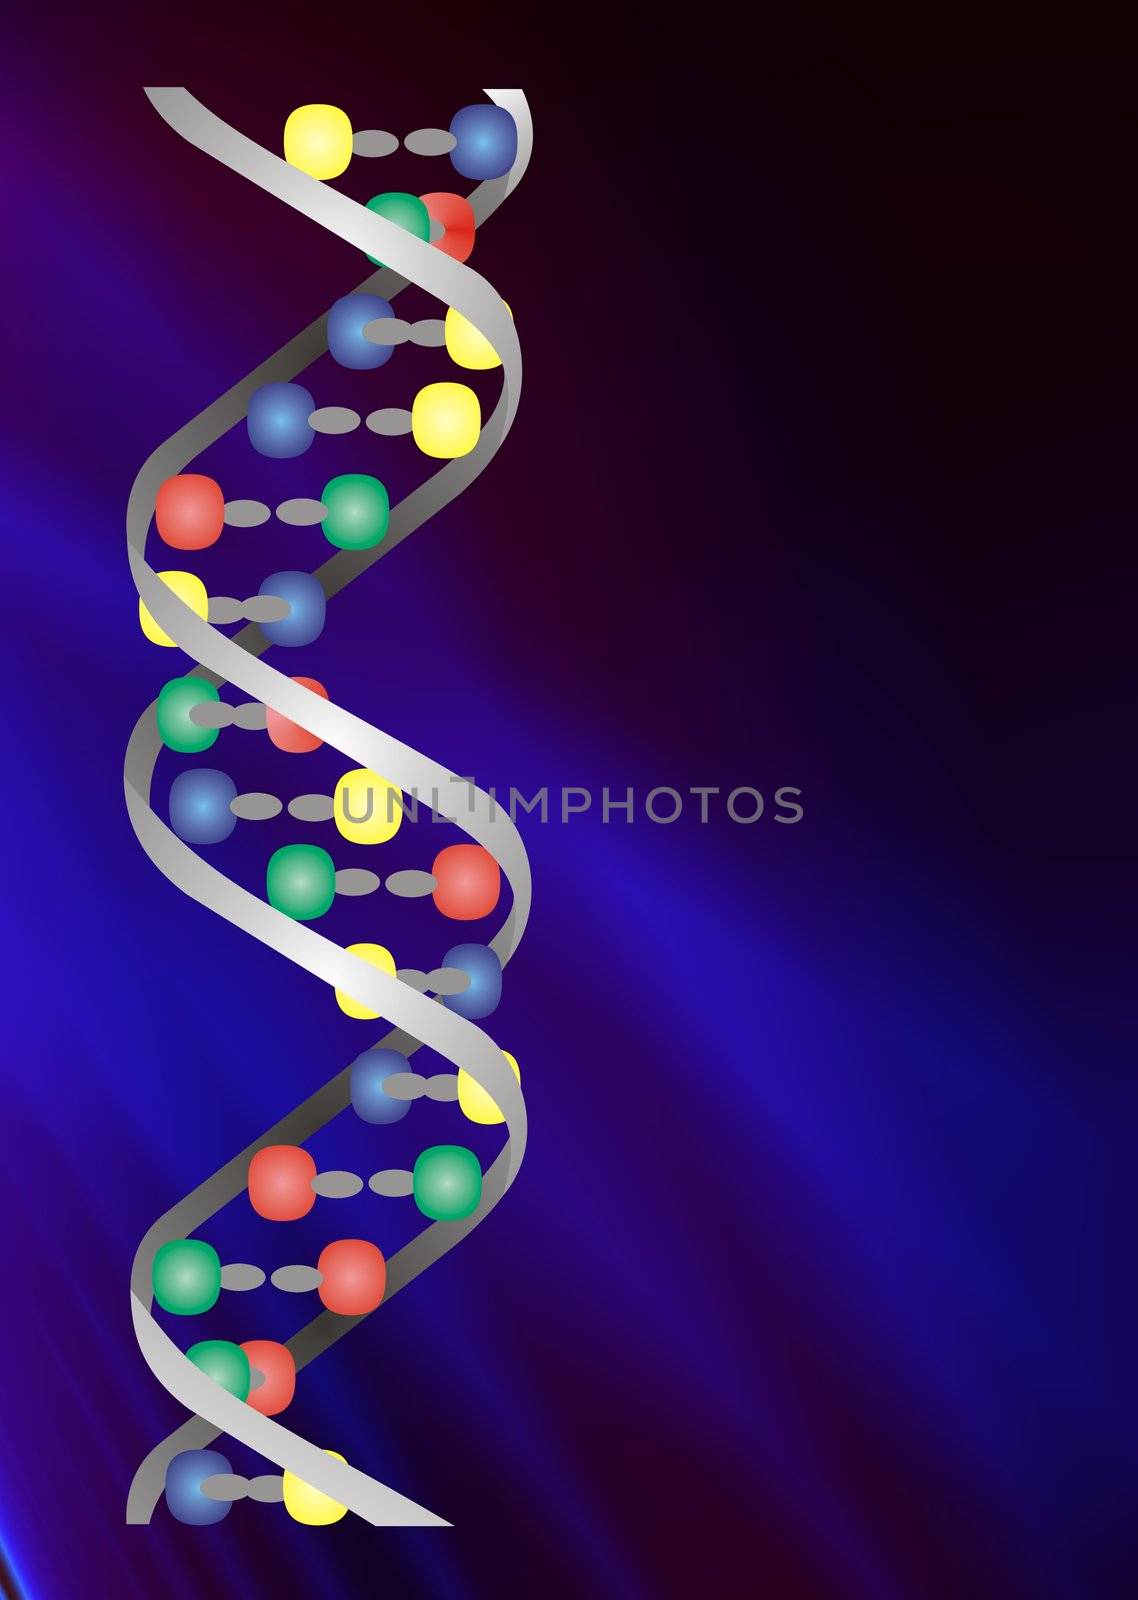 Conceptual illustration of two strangs of DNA double helix